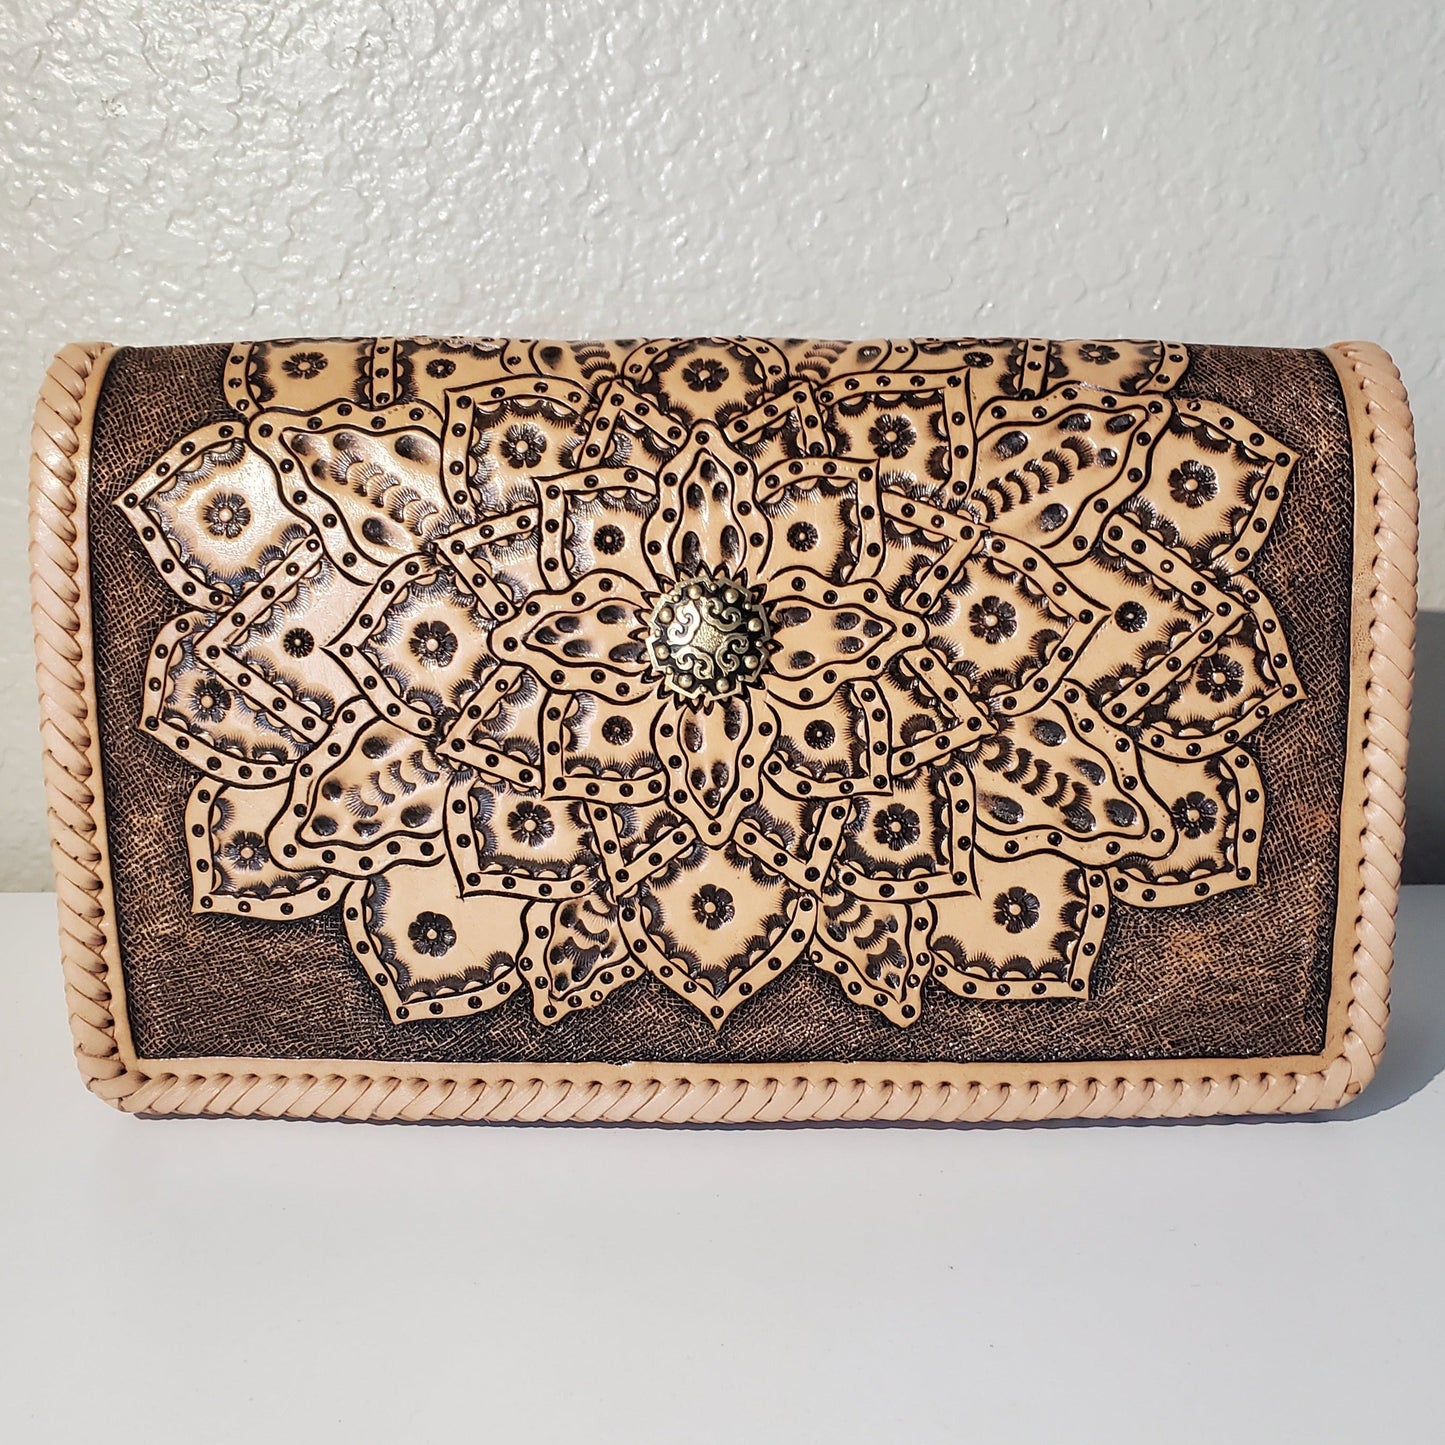 Hand Made Leather Crossbody Bag "CECELIA" by MIOHERMOSA Natural Cecilia Mayan Flower